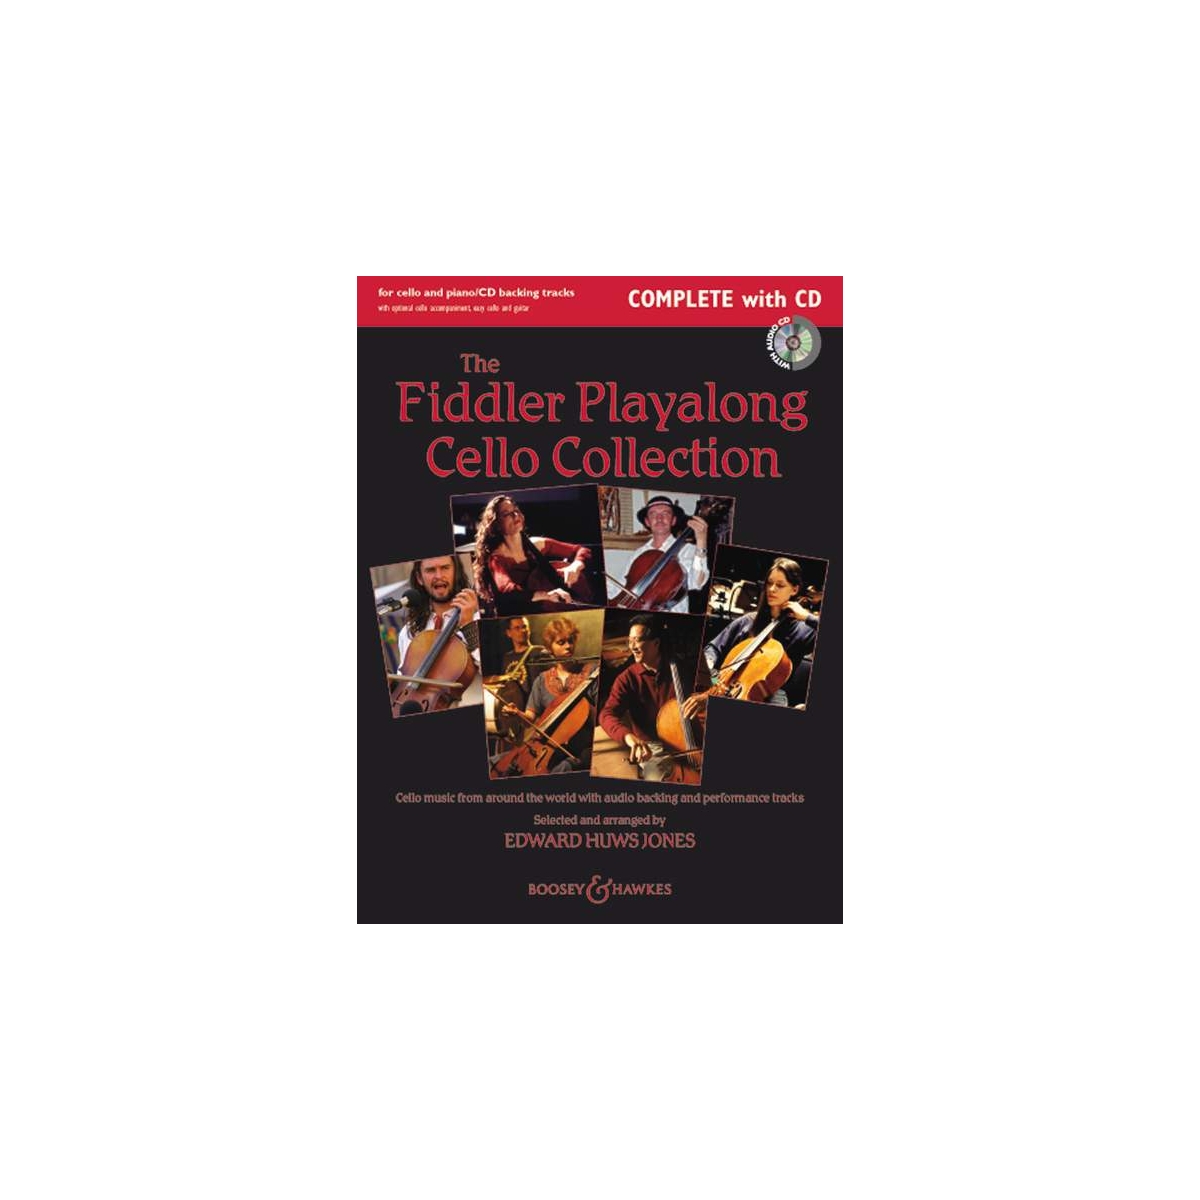 The Fiddler Playalong Cello Collection